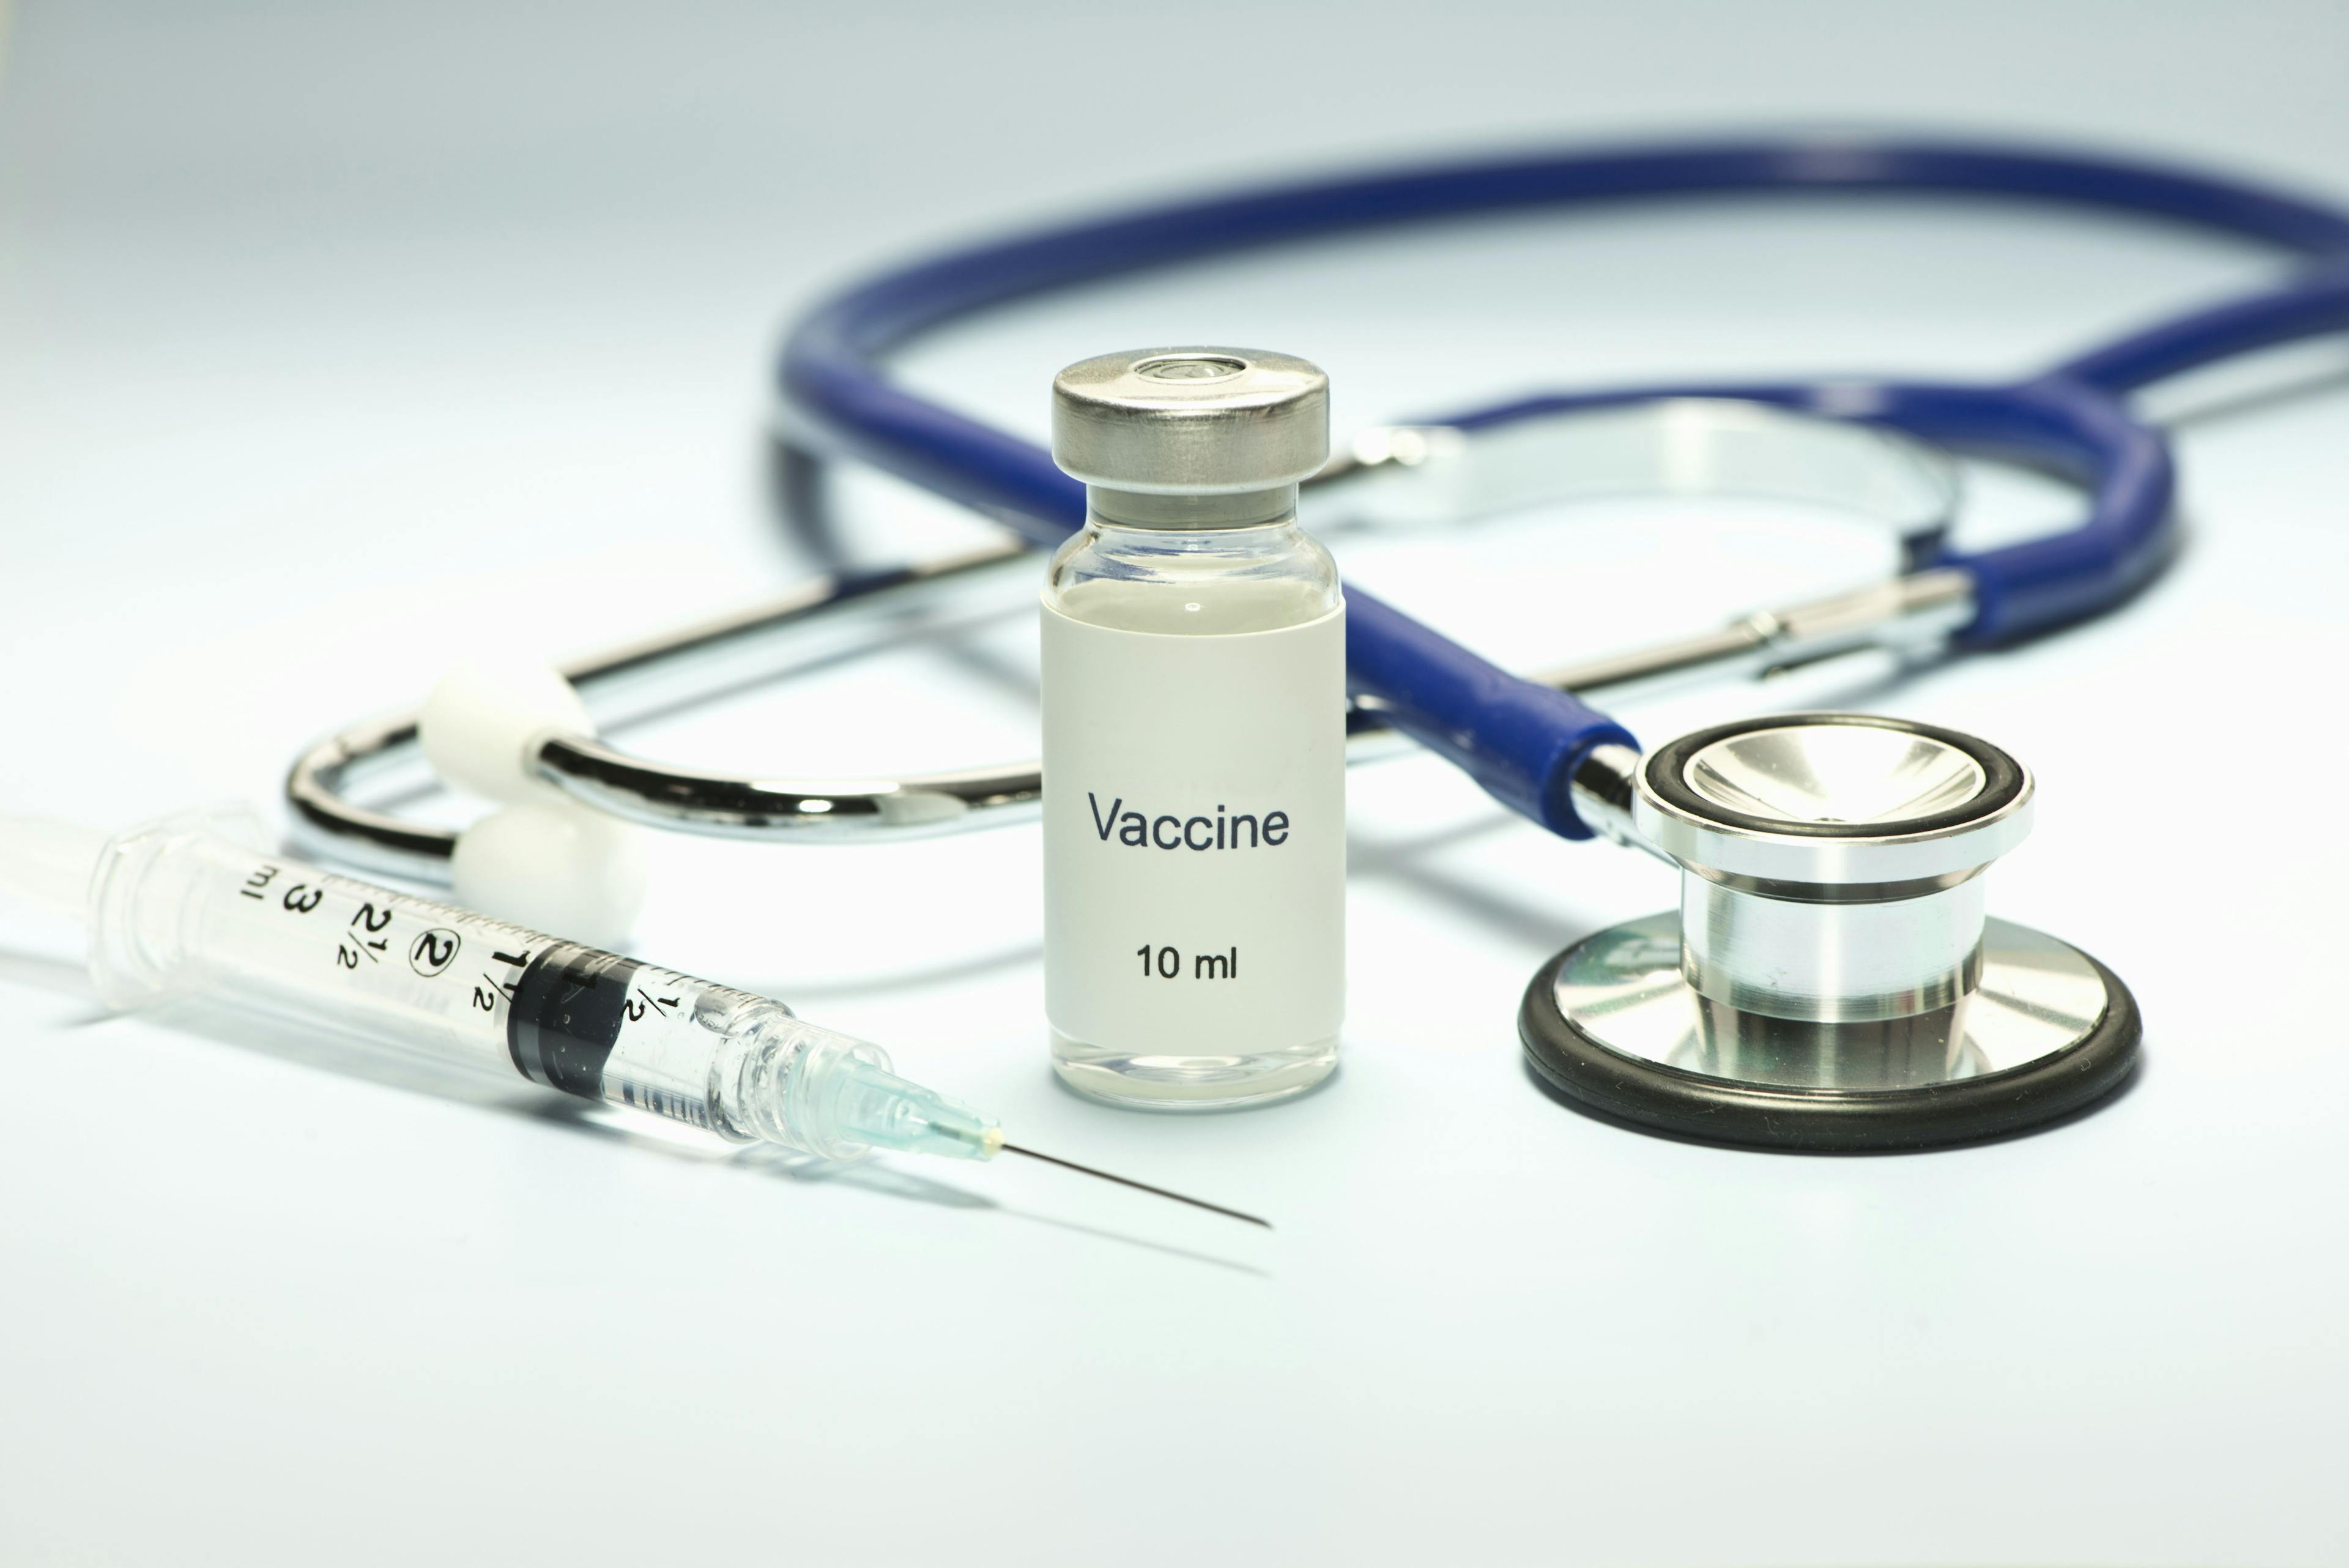 Image of vaccine solution